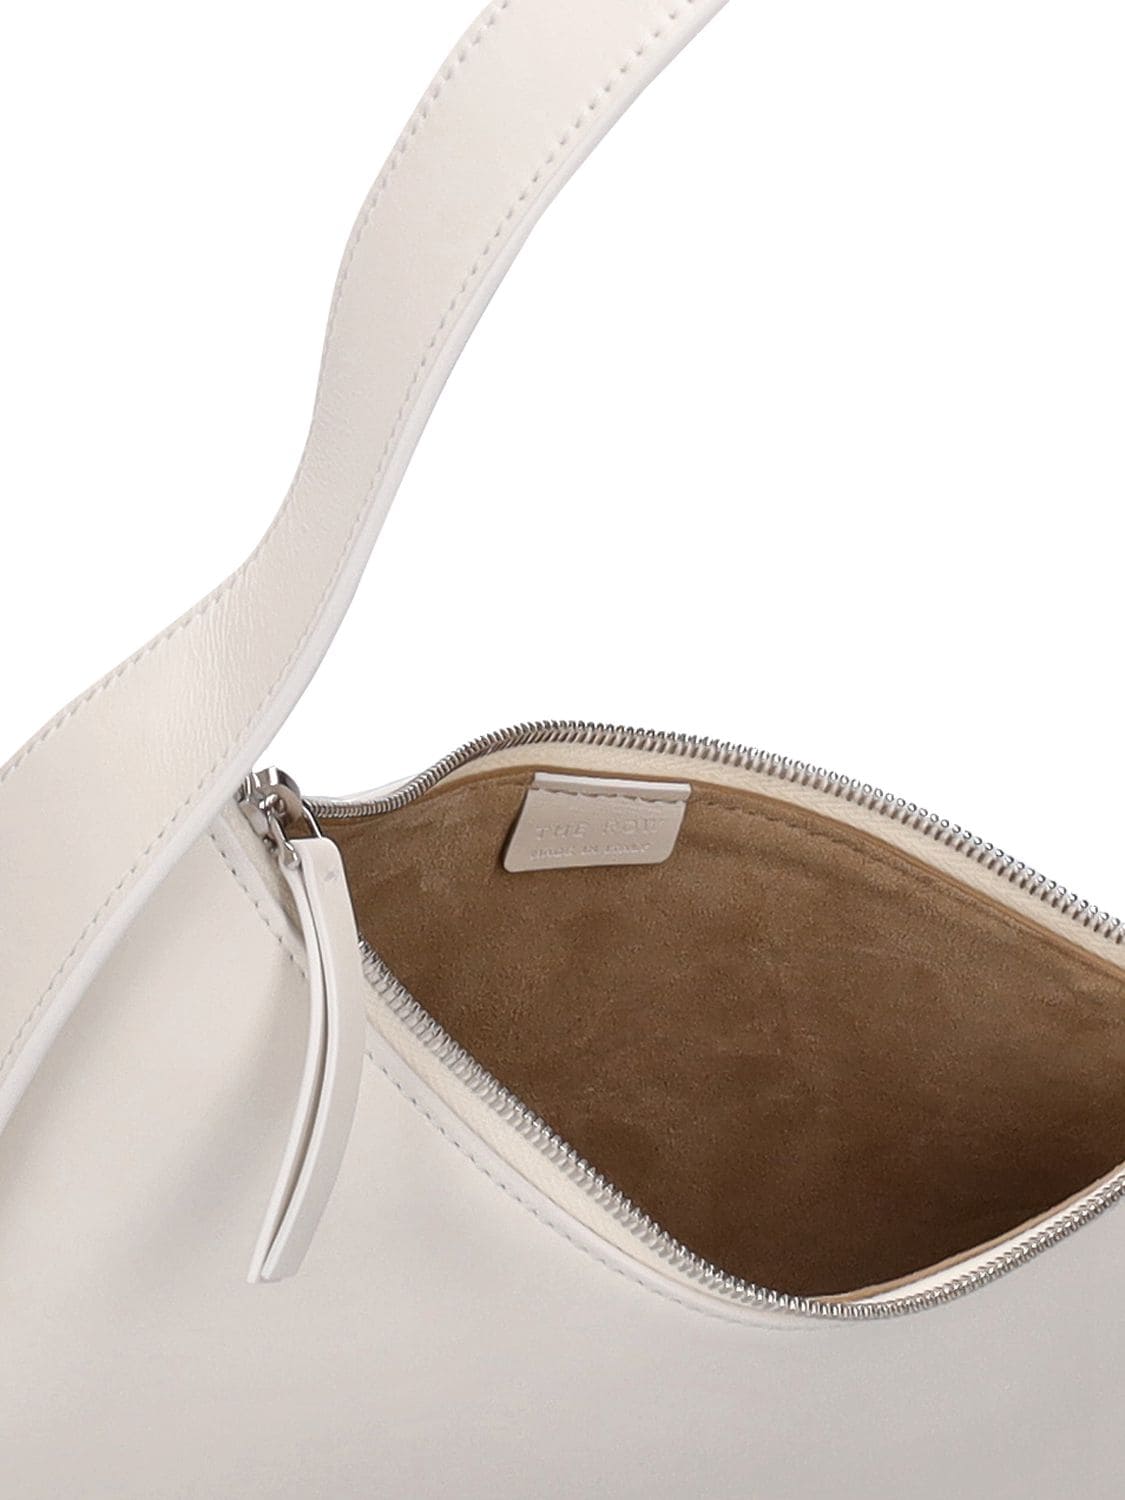 Shop The Row Smooth Leather Half Moon Shoulder Bag In New Ivory Pld